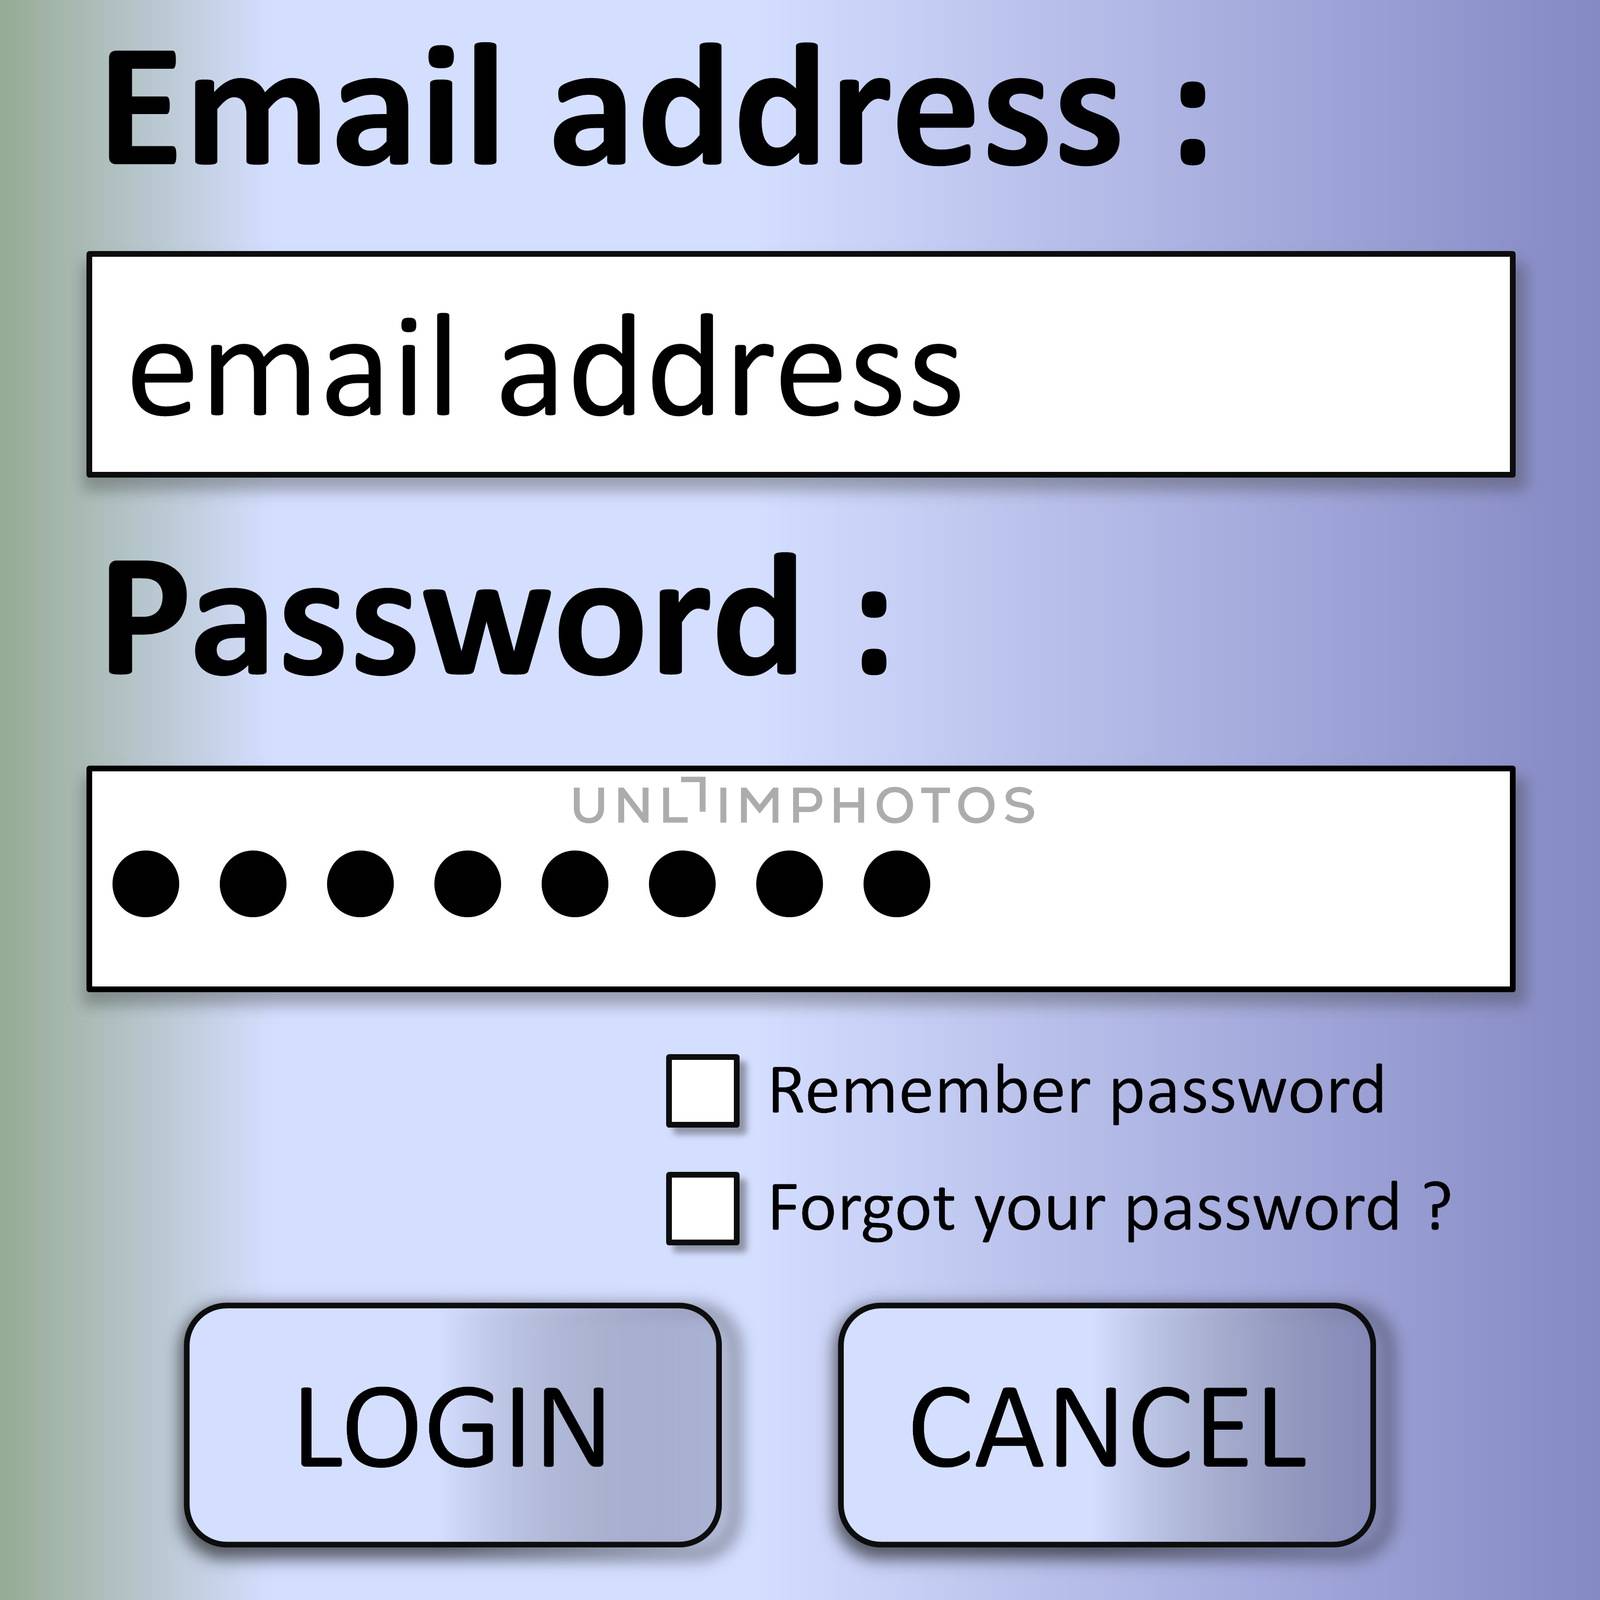 Login form with email address, password and buttons